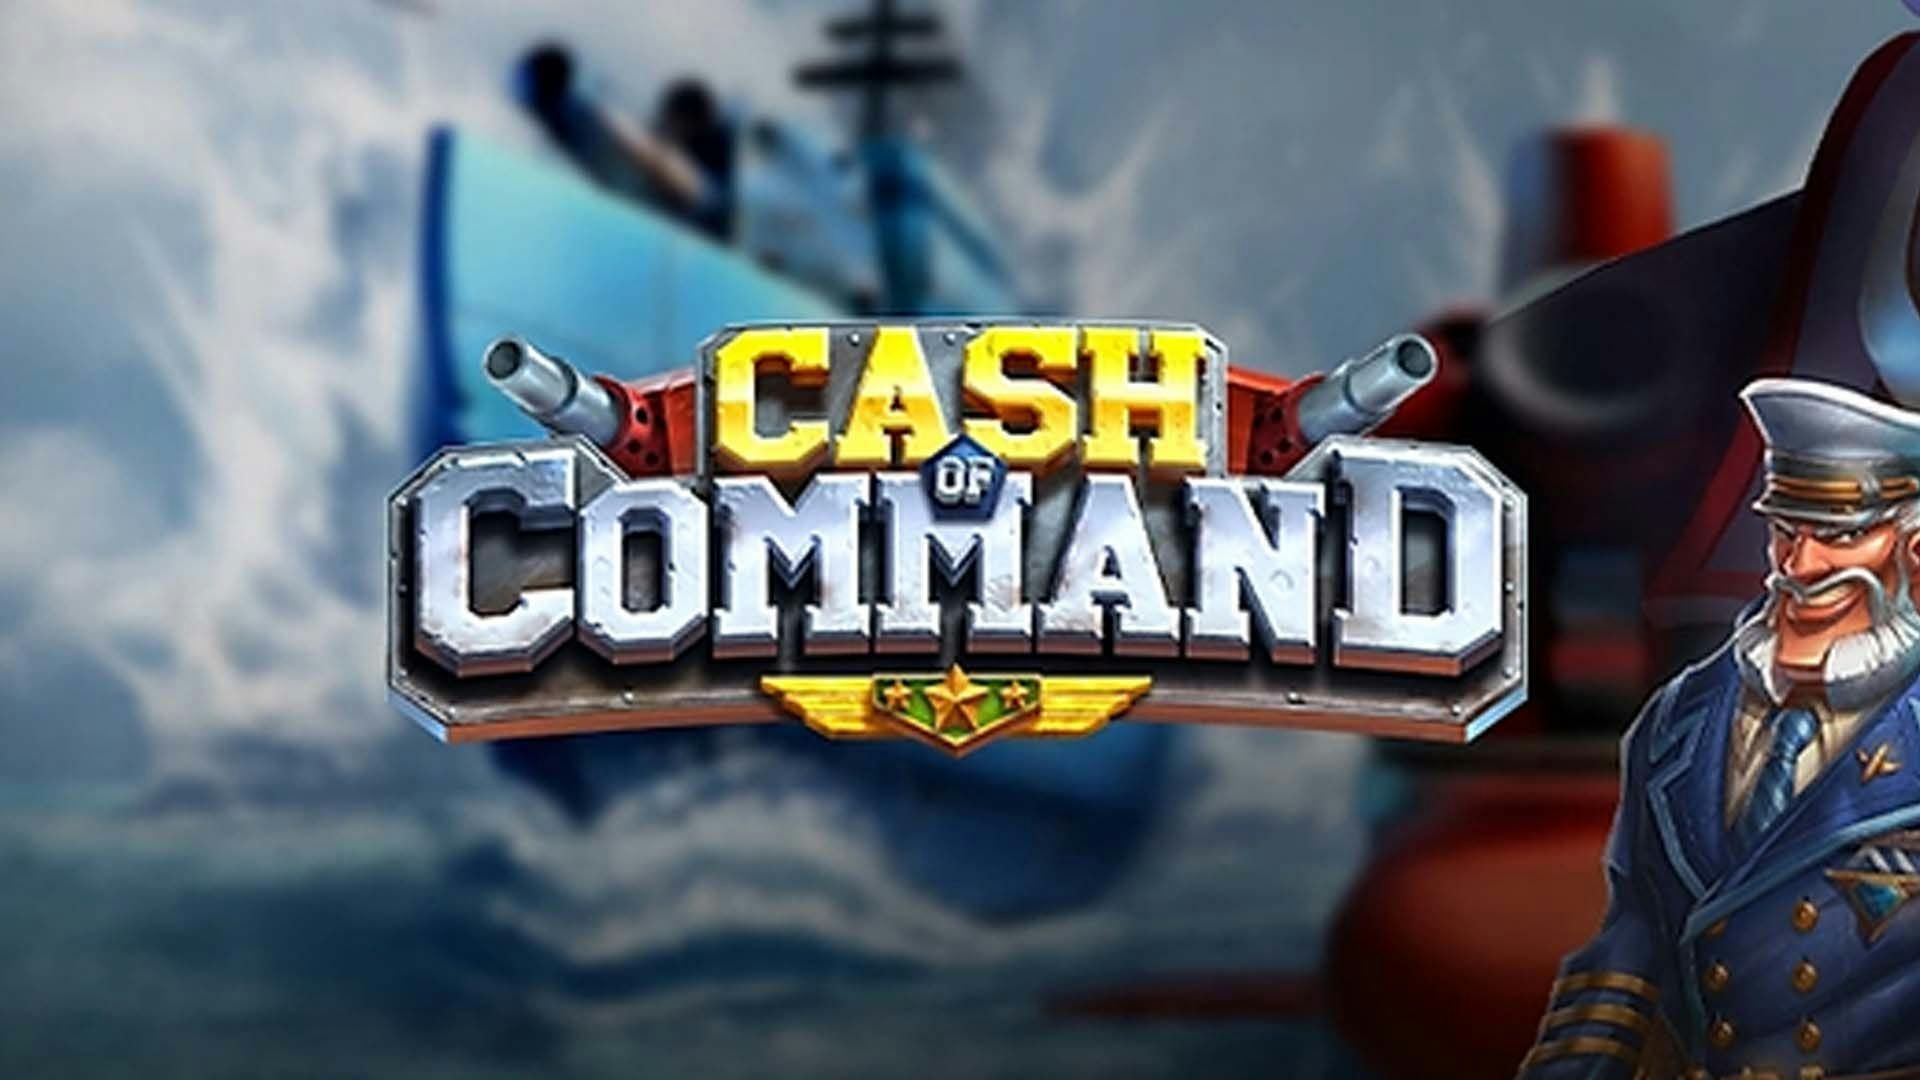 Cash Of Command Slot Machine Online Free Game Play